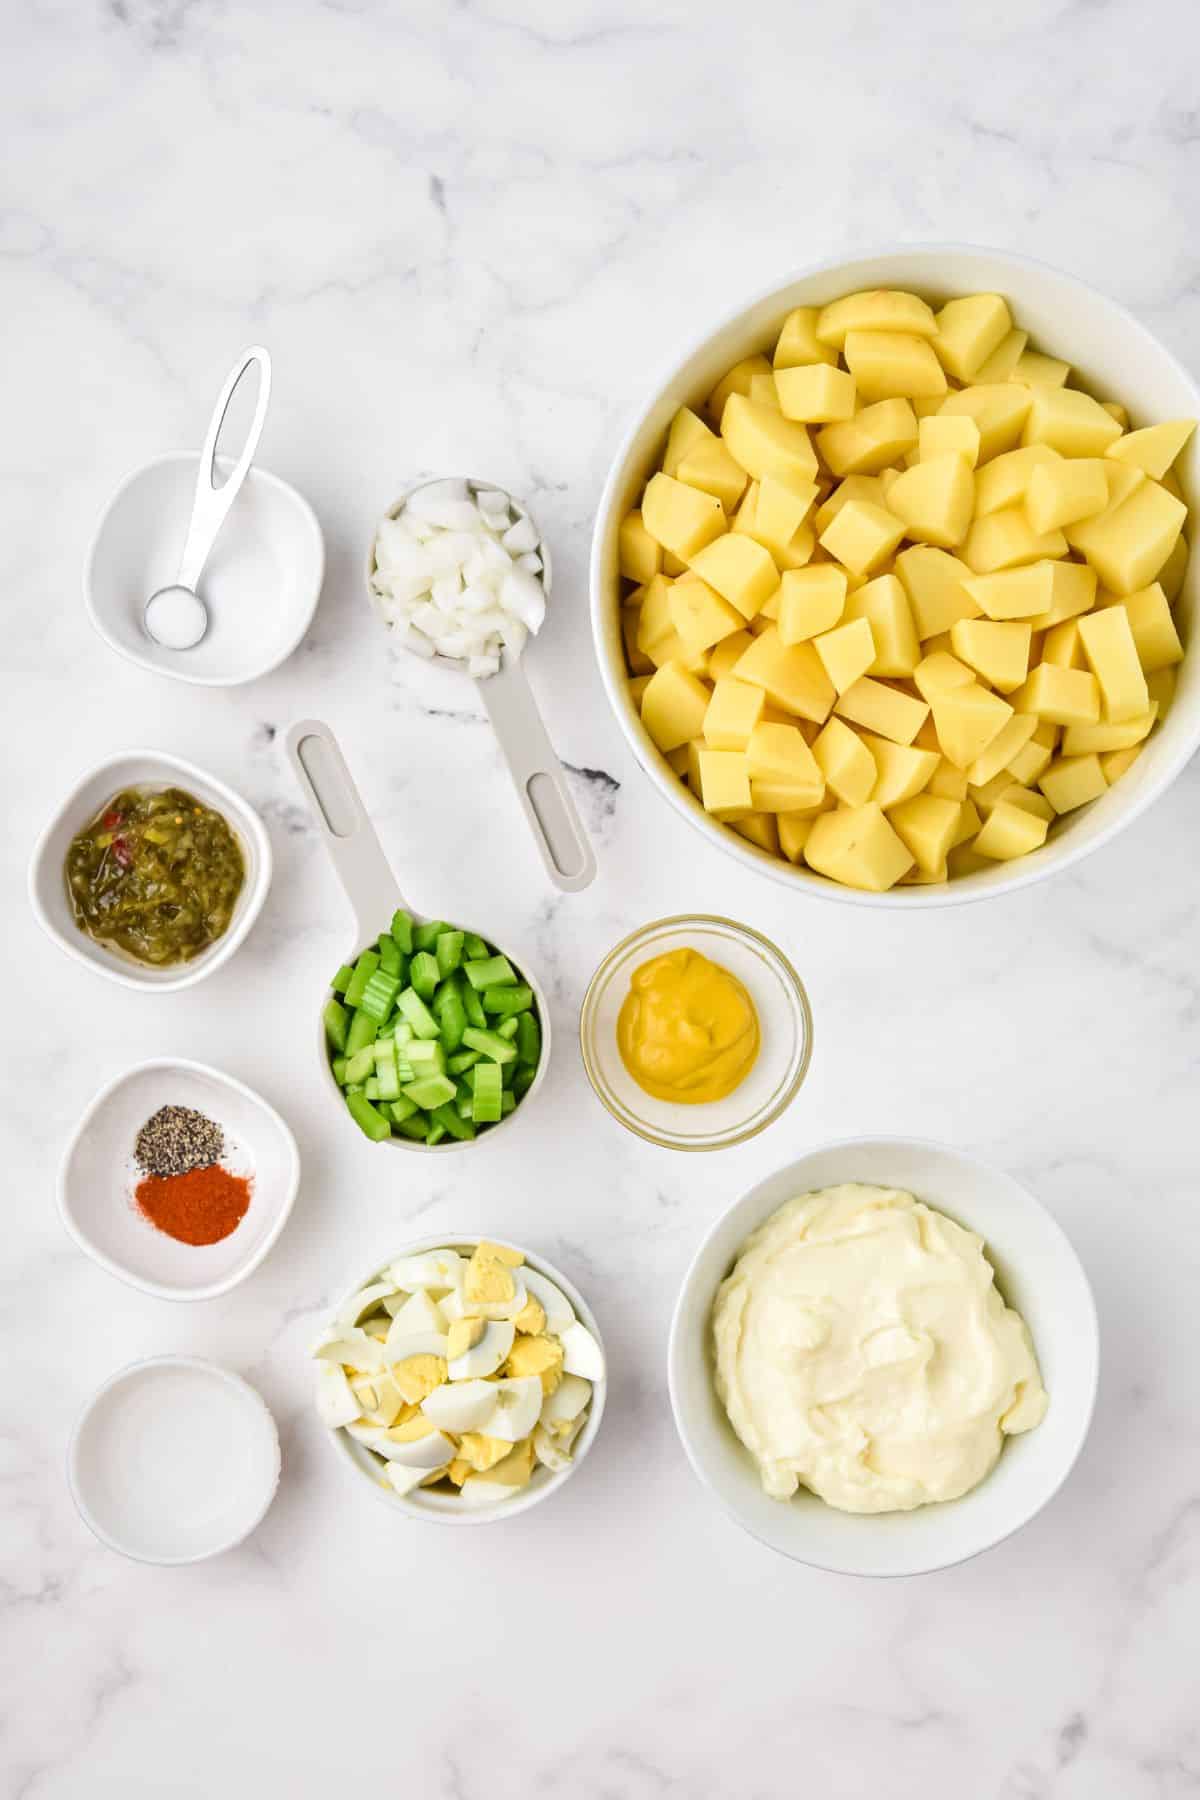 ingredients in bowls on white counter: diced and peeled potatoes, mustard, chopped onions, salt, sweet pickle relish, chopped celery, pepper and paprika, vinegar, chopped hard boiled eggs, and mayonnaise